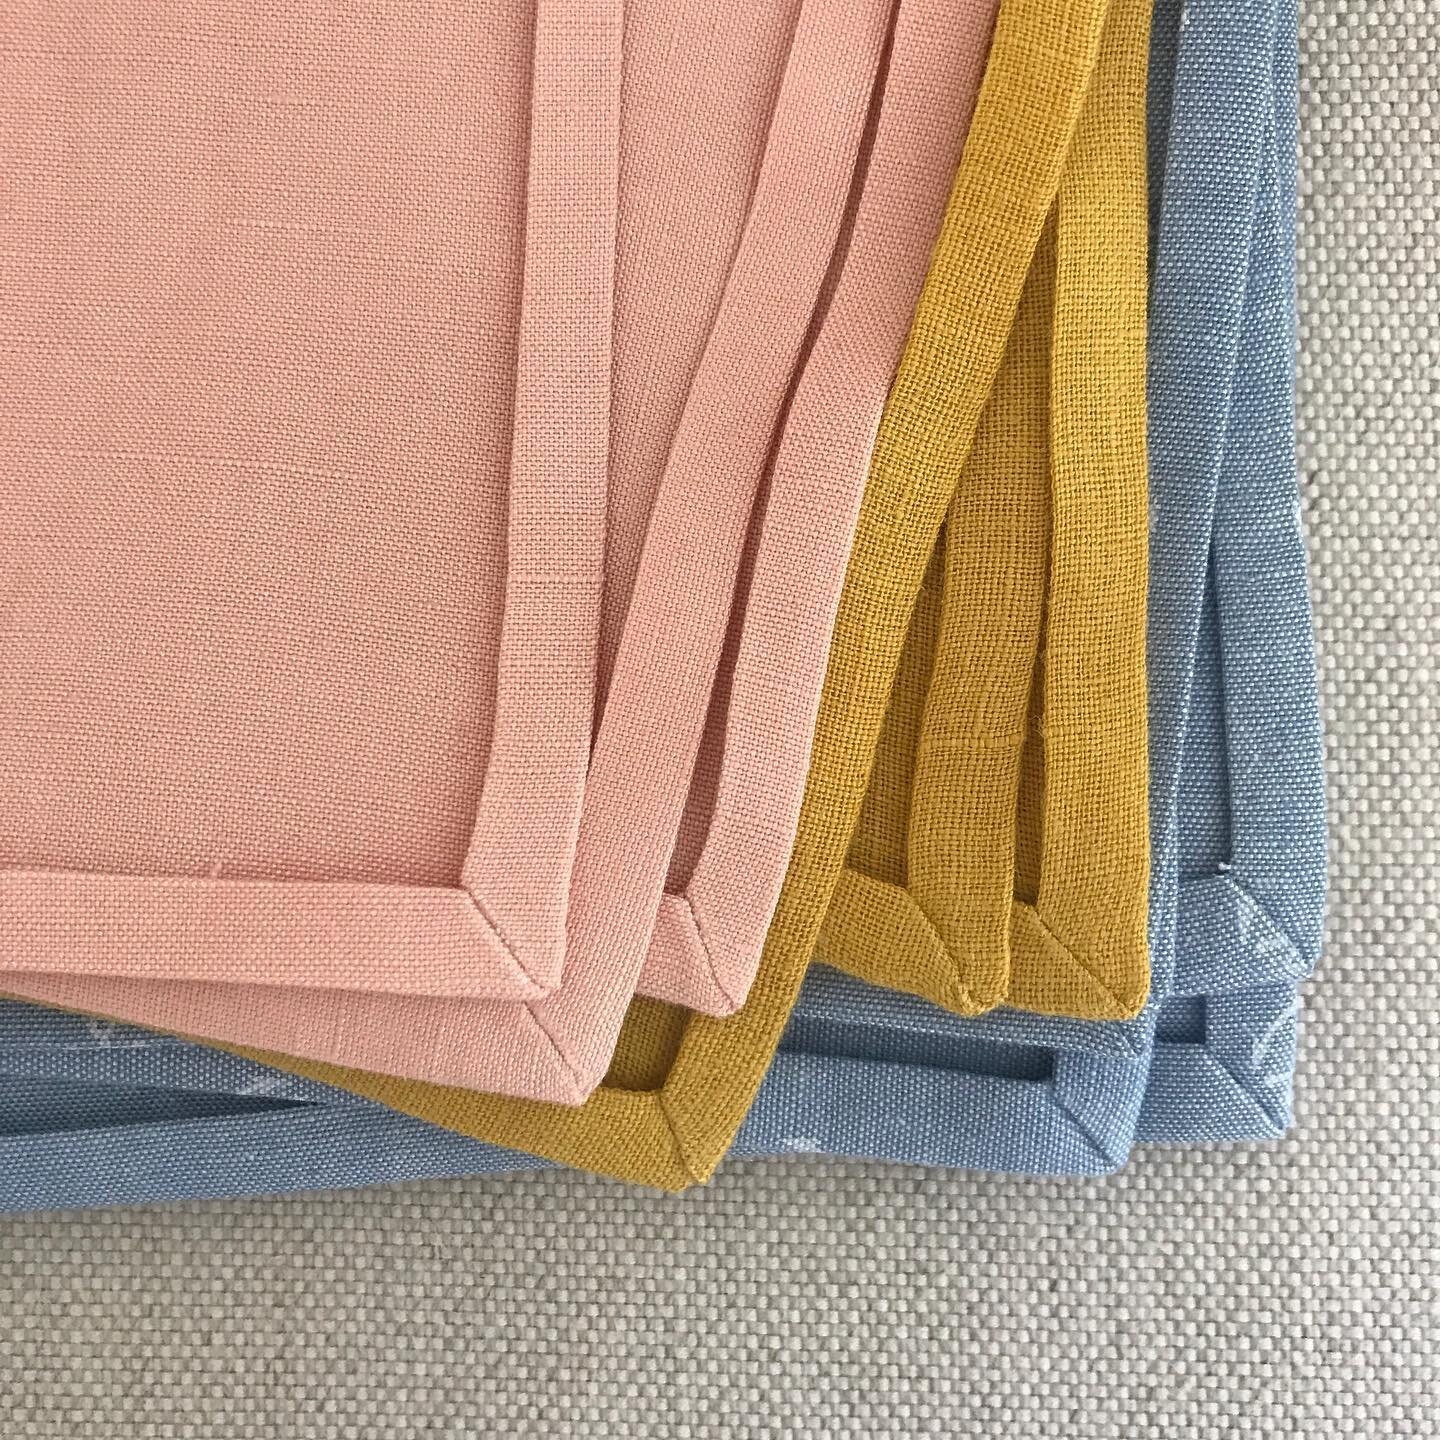 🇺🇸working hard to get ready for @cranewaycraftfair this weekend! Here are some handkerchiefs in the making. Each of these are made out of reclaimed textiles from different sources: pink donated by the brilliant @amykuschel , yellow purchased in Fra